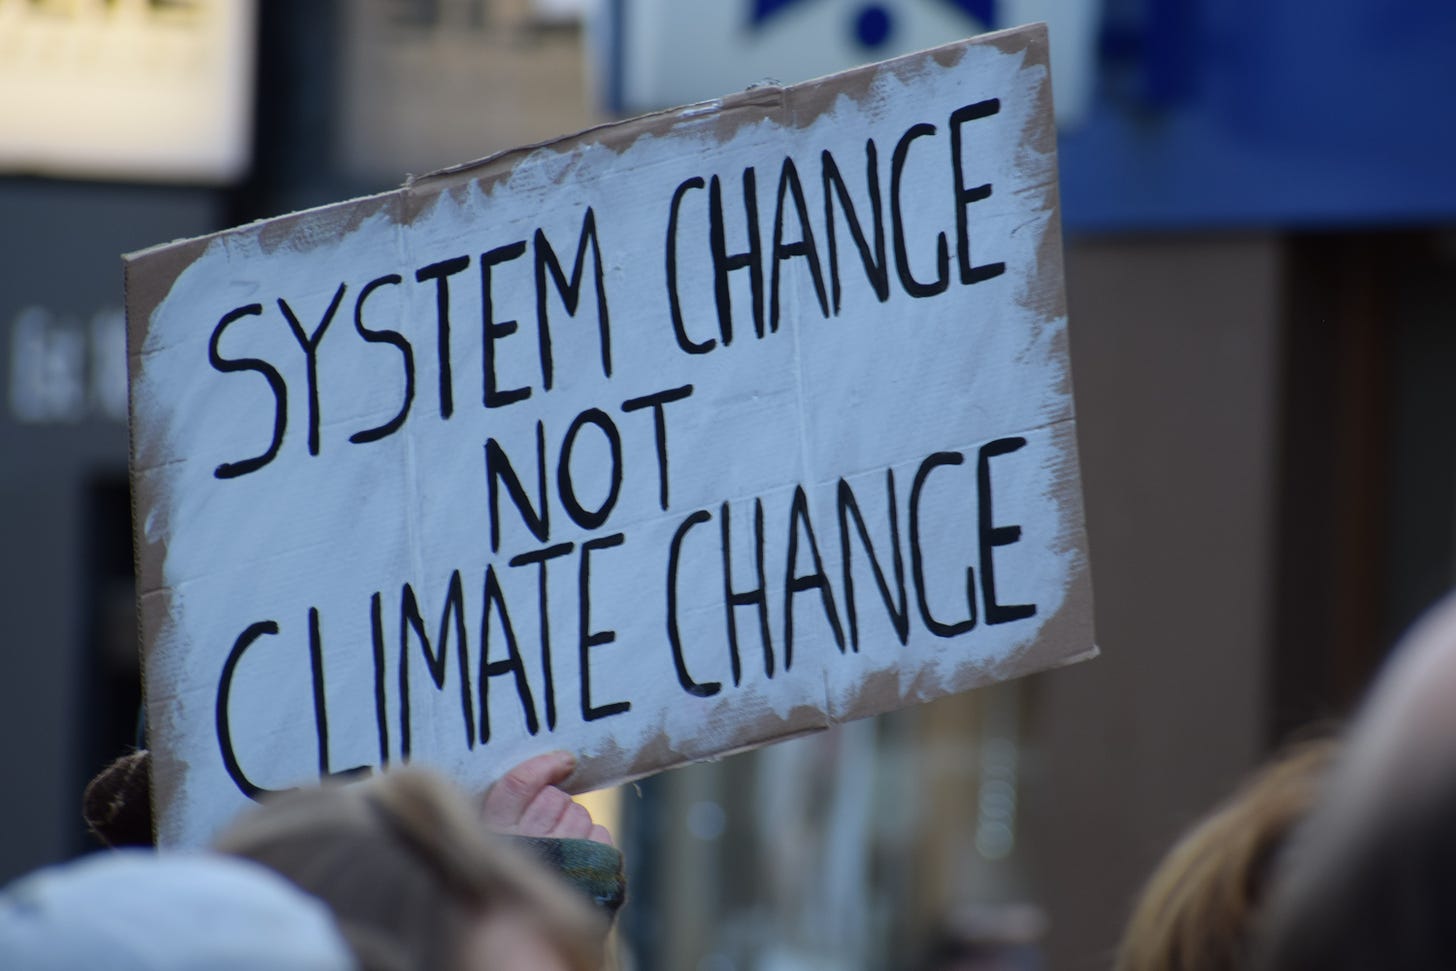 A protest sign reading "System Change Not Climate Change"